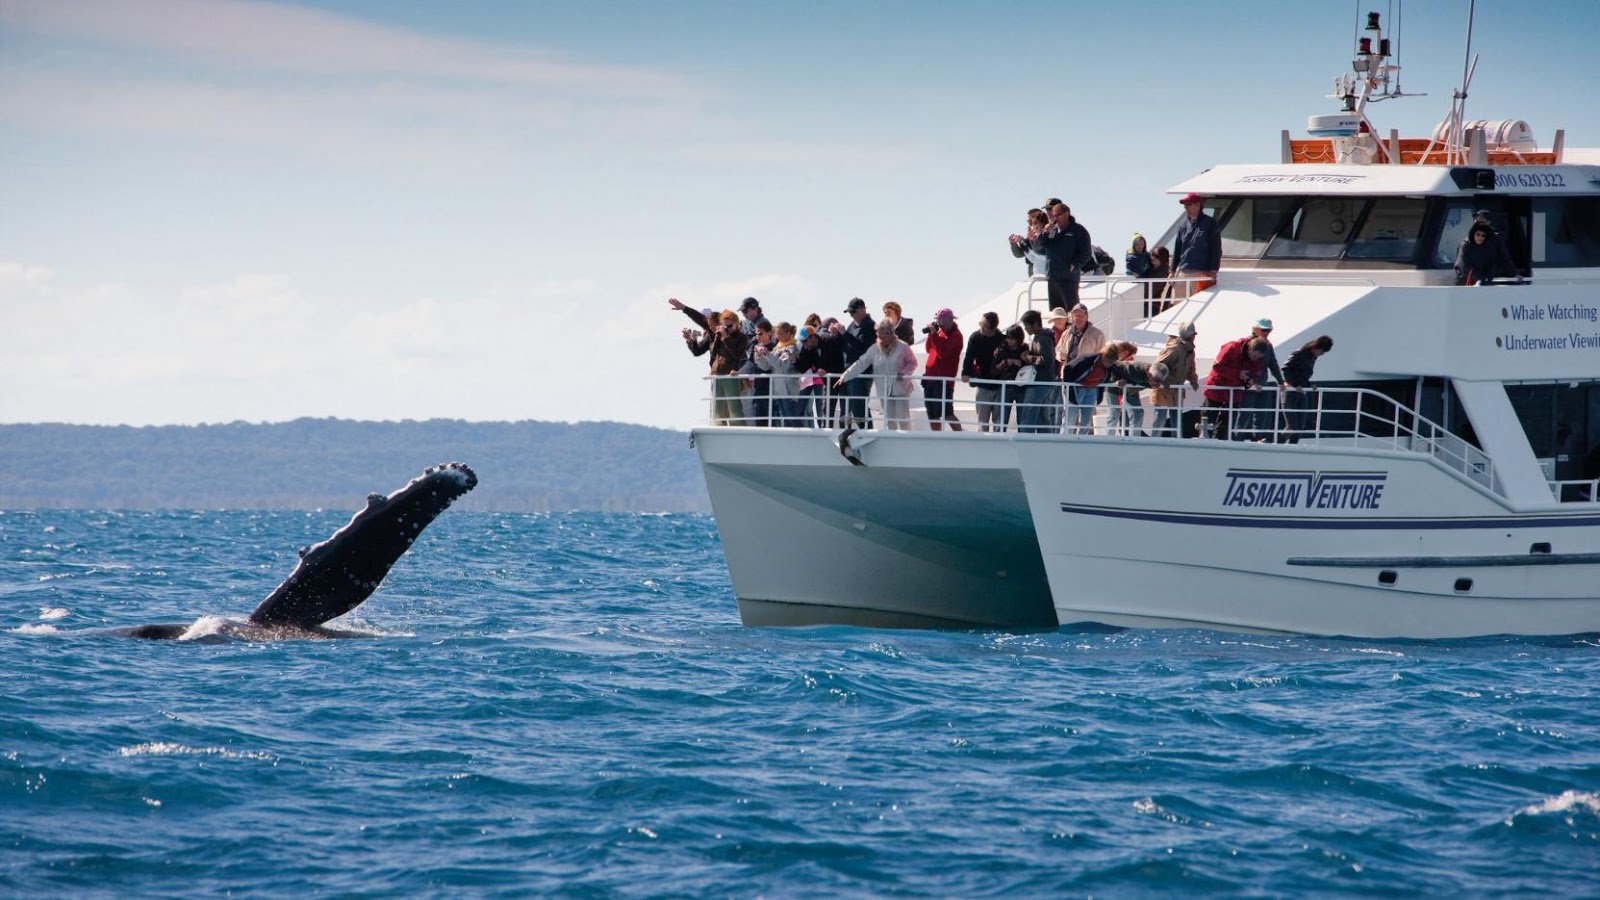 6 Ways To Properly Go Whale Watching